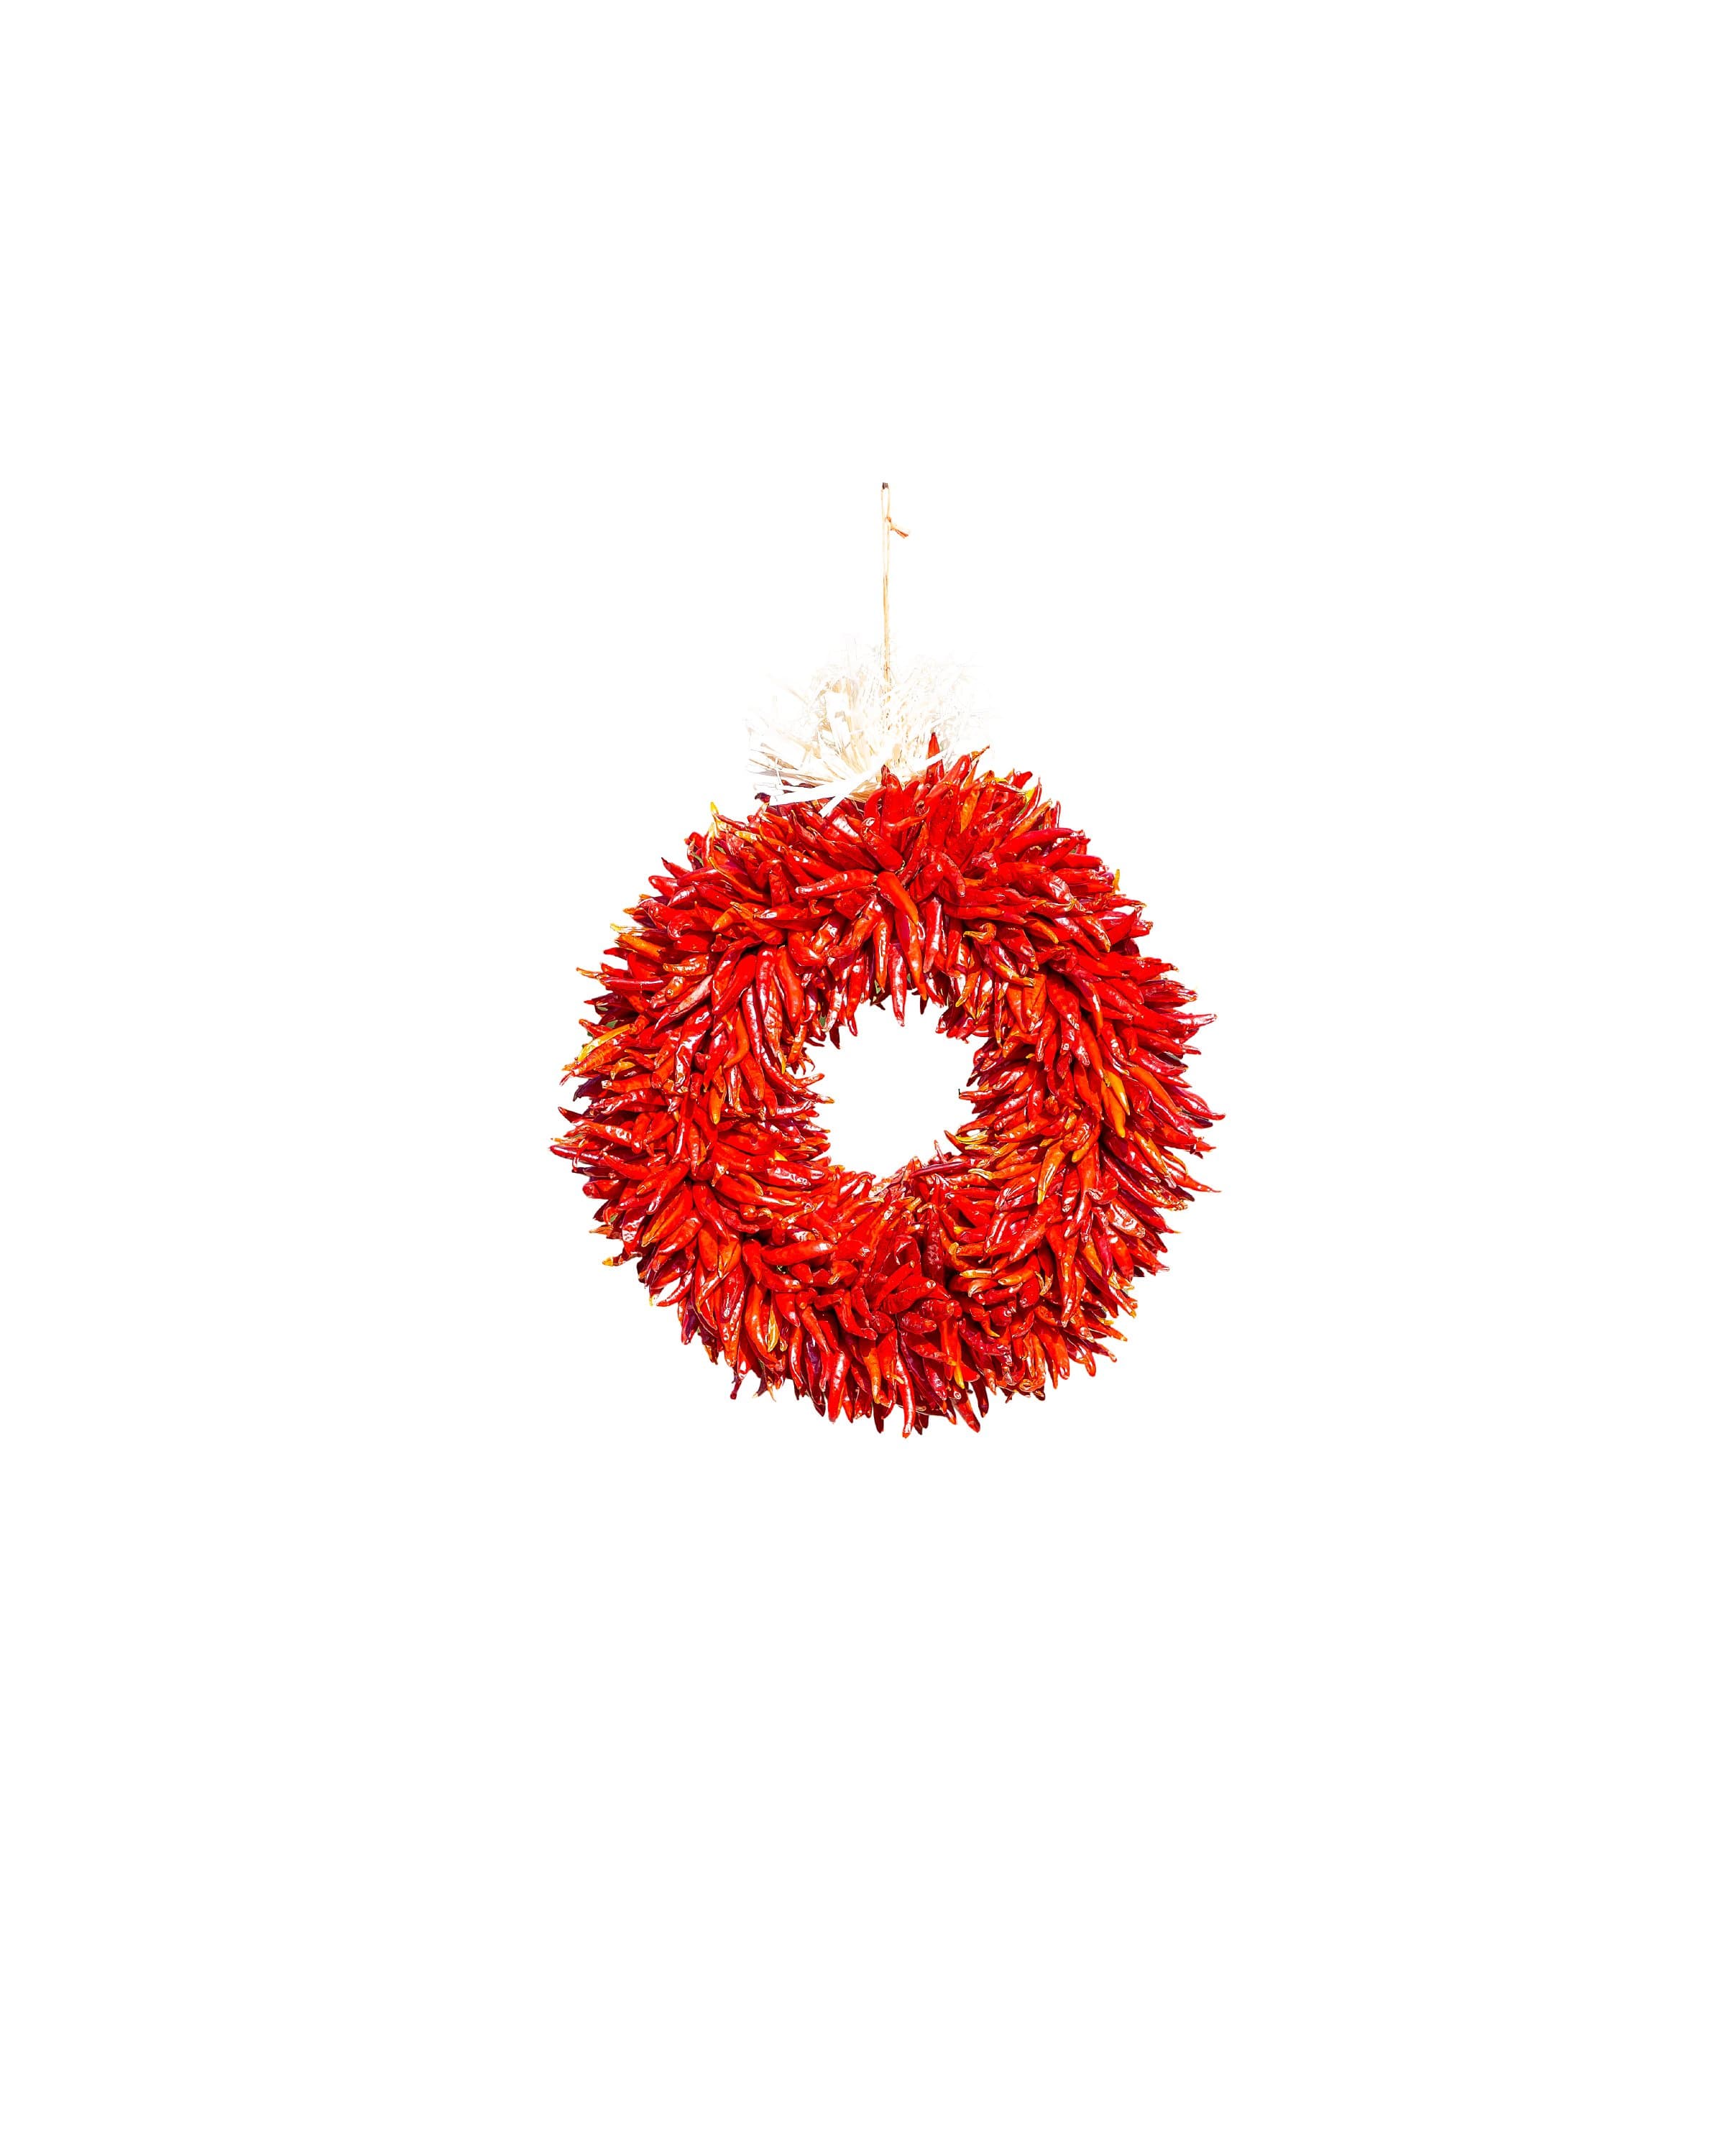 A vibrant red Chile Pequin wreath hangs against a plain white background, adding a fiery decorative touch with the Chile Pequin Wreaths.